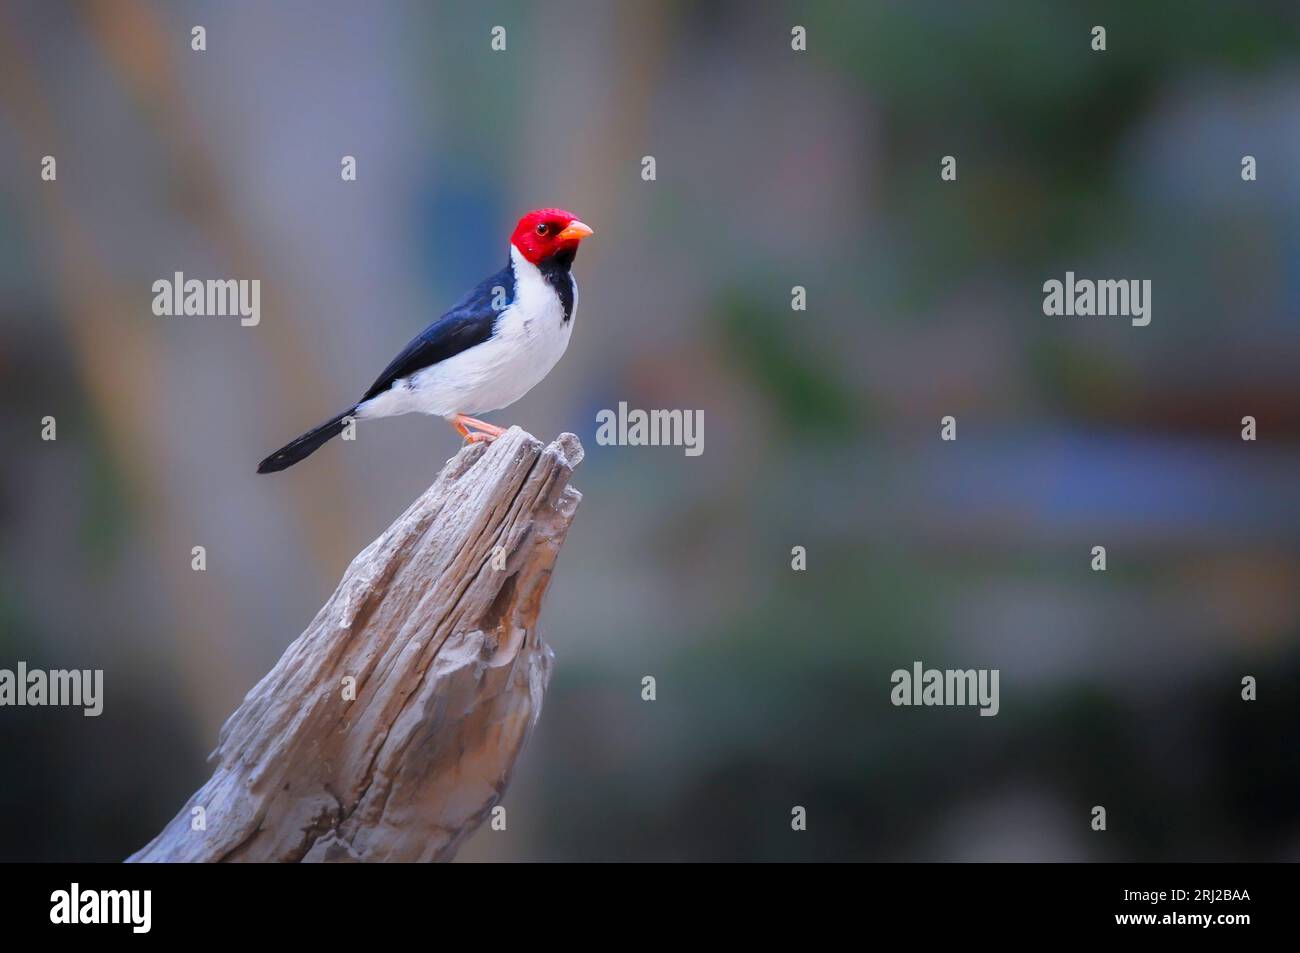 Yellow-billed Cardinal, Paroaria capitata, perched on a branch in the Pantanal, Mato Grosso, Brazil Stock Photo